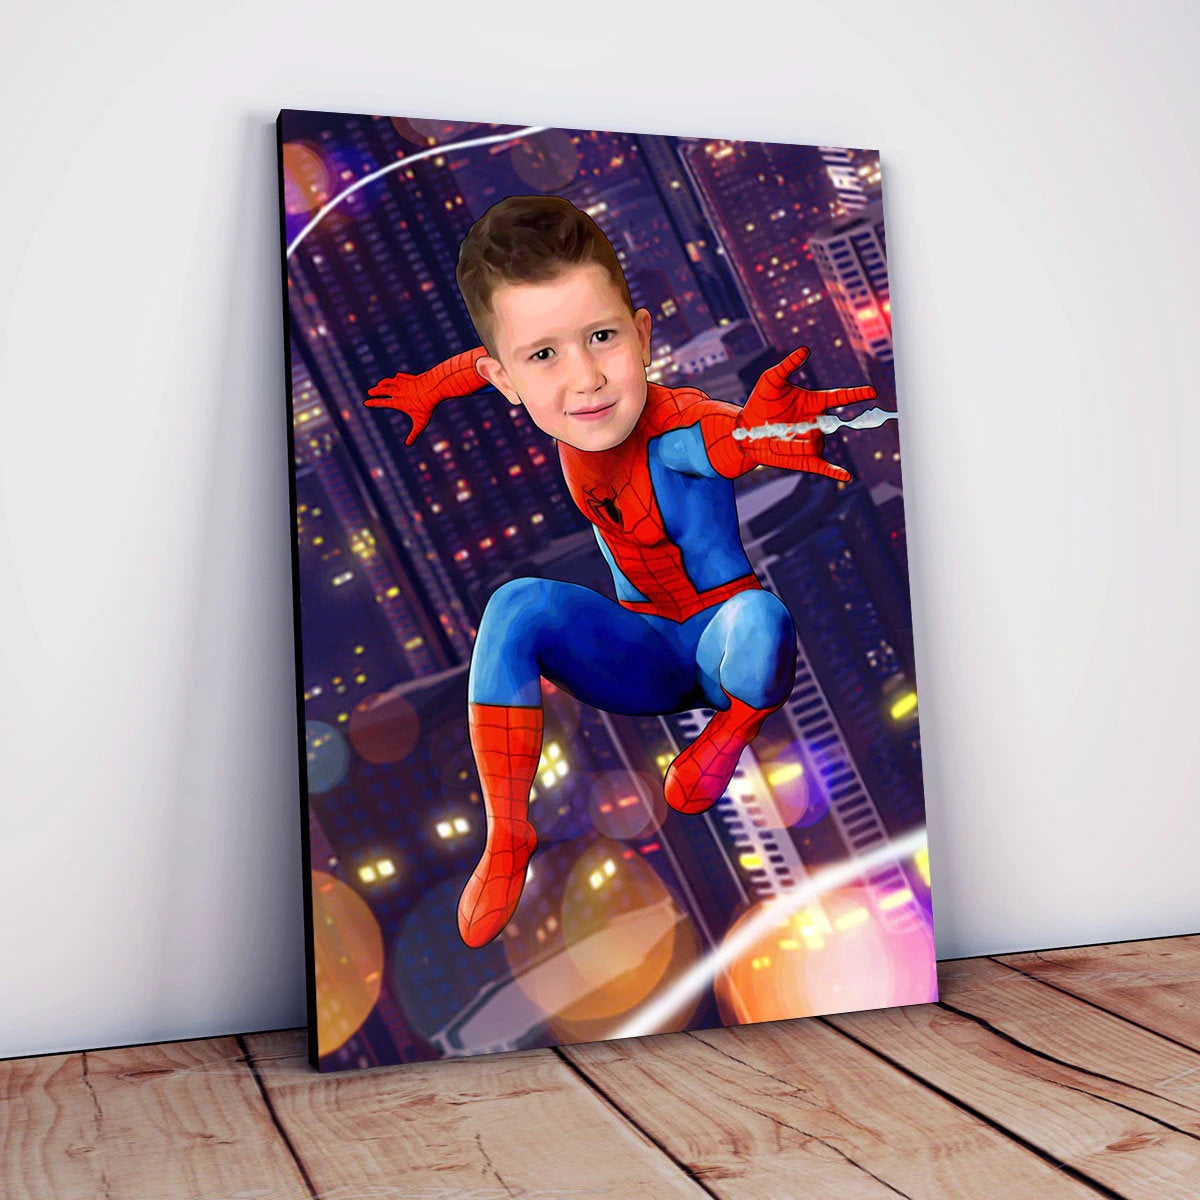 Spiderman fans, get ready to swing into action with this unique gift!